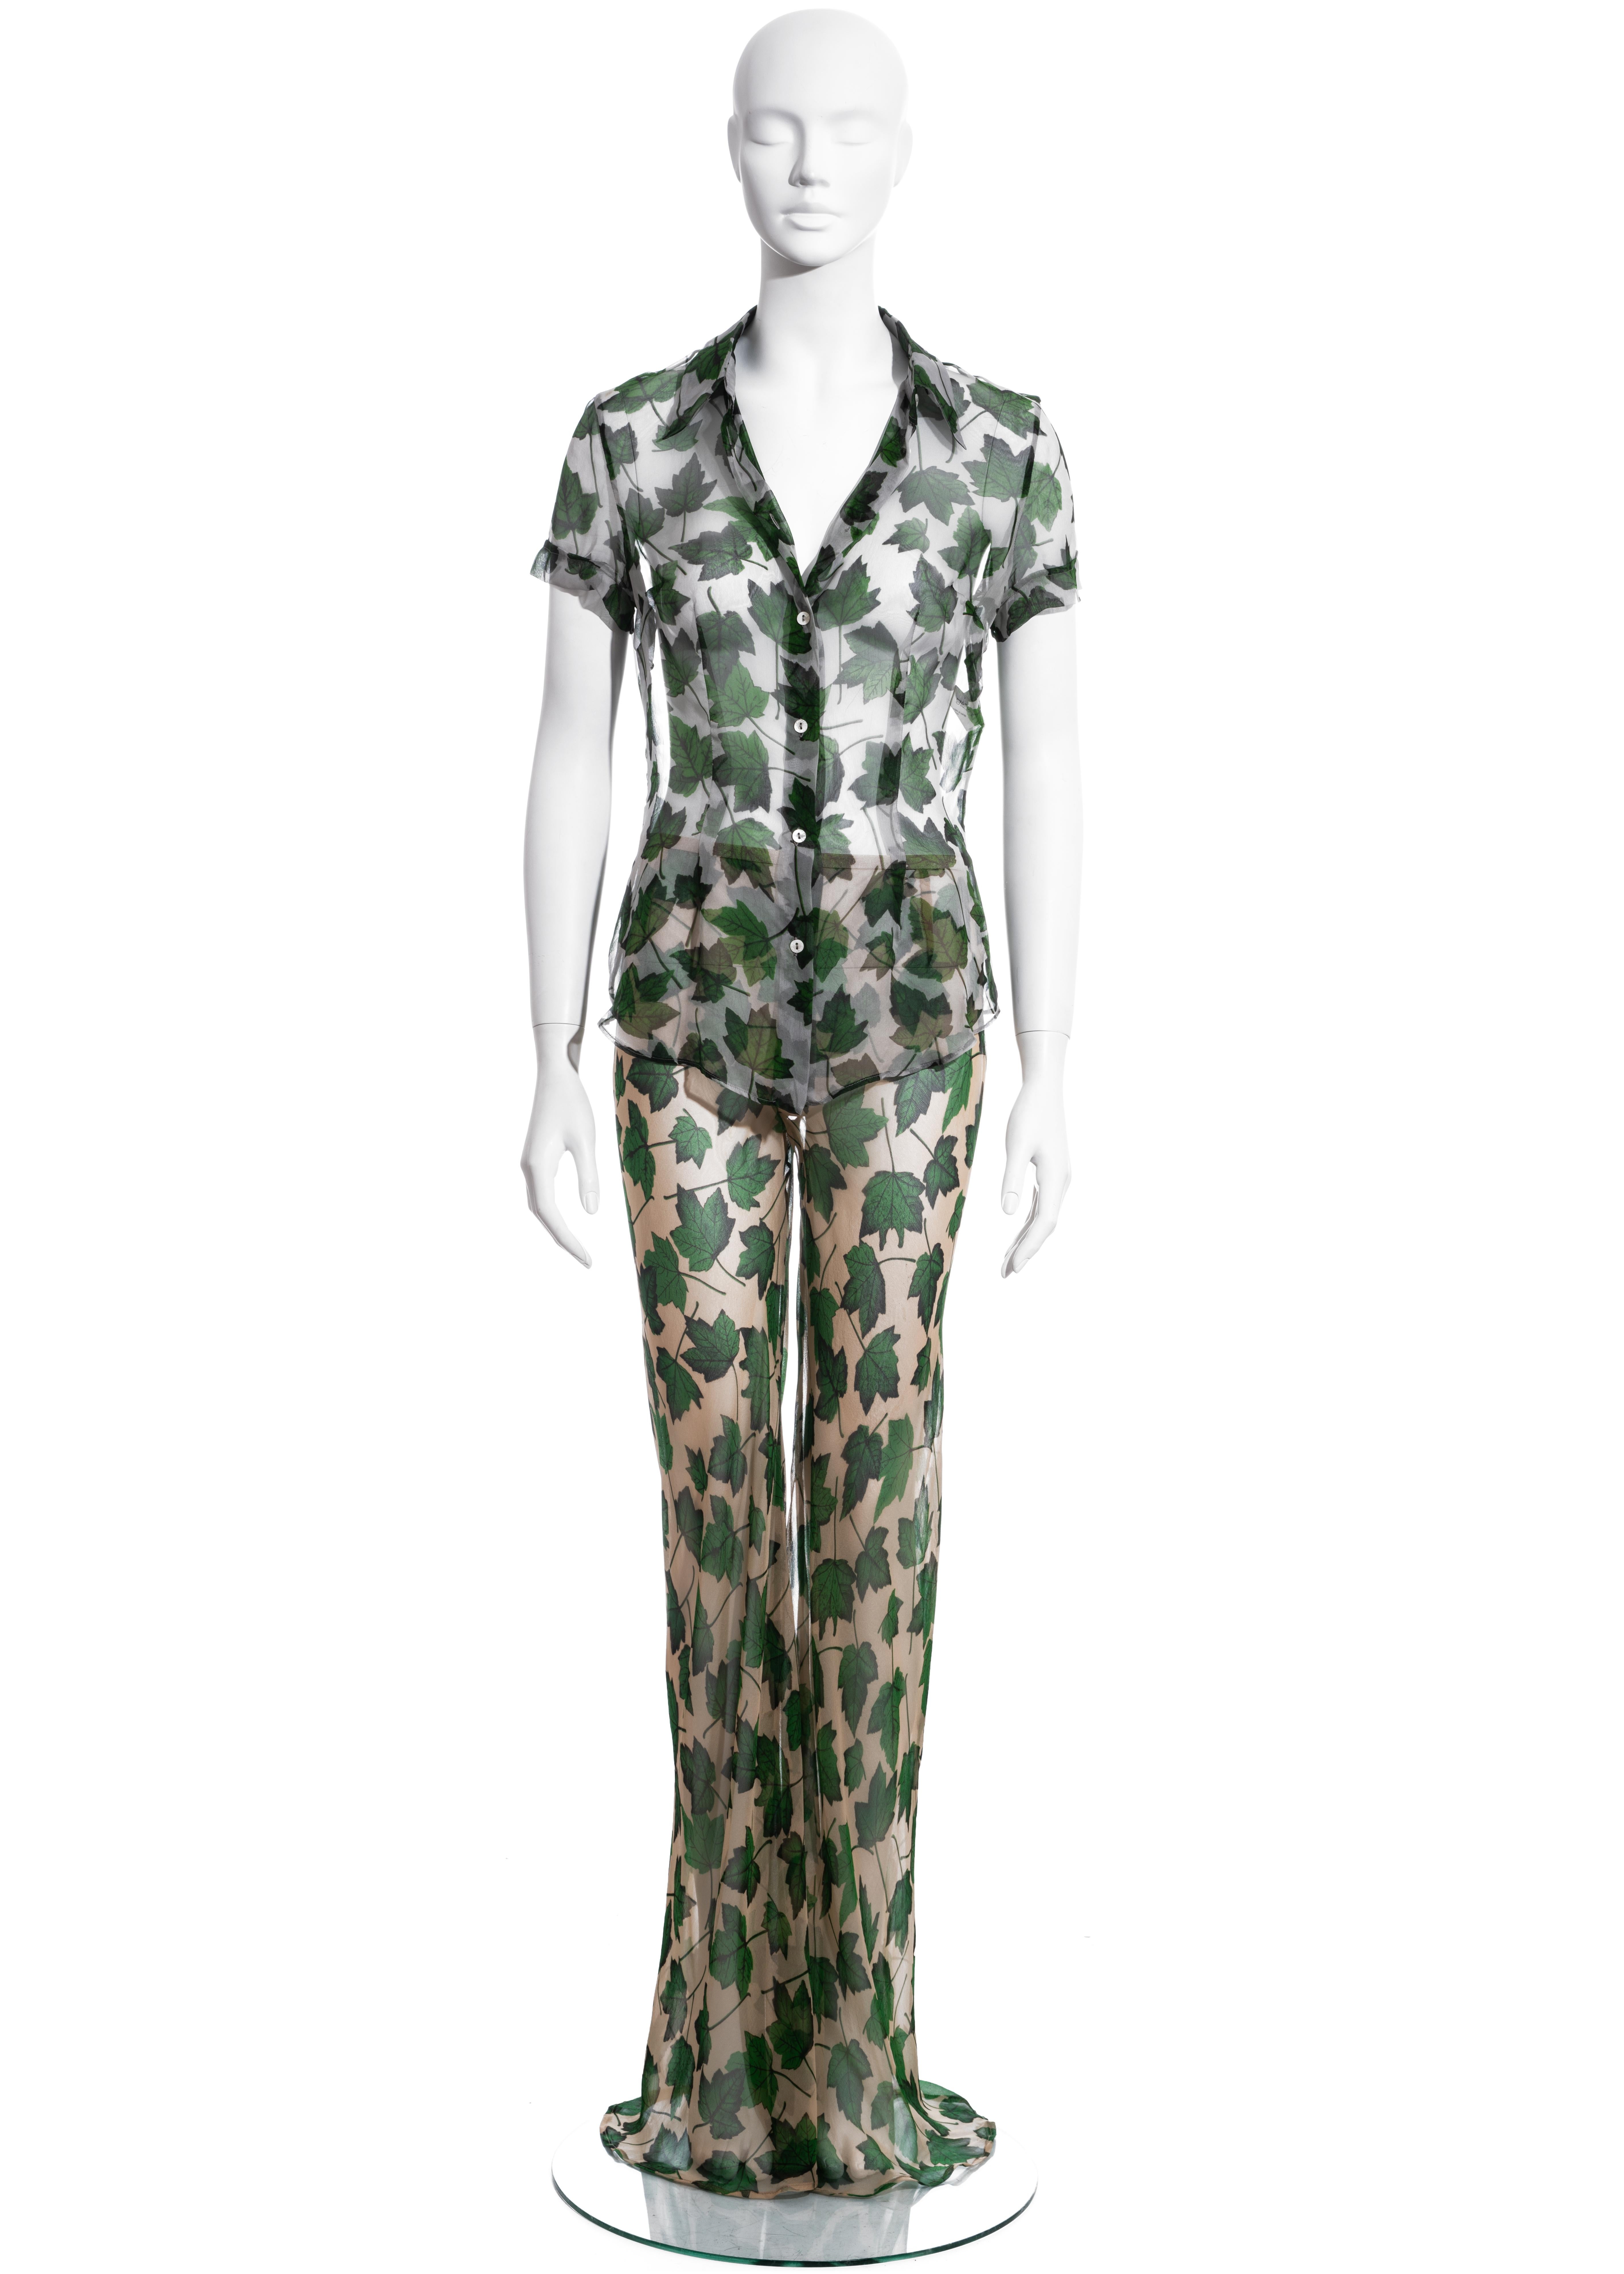 ▪ Dolce & Gabbana green leaf print pant suit
▪ 100% Silk
▪ Button-up short sleeve blouse 
▪ Nude flared pants
▪ IT 42 - UK 10 - US 6
▪ Spring-Summer 1997